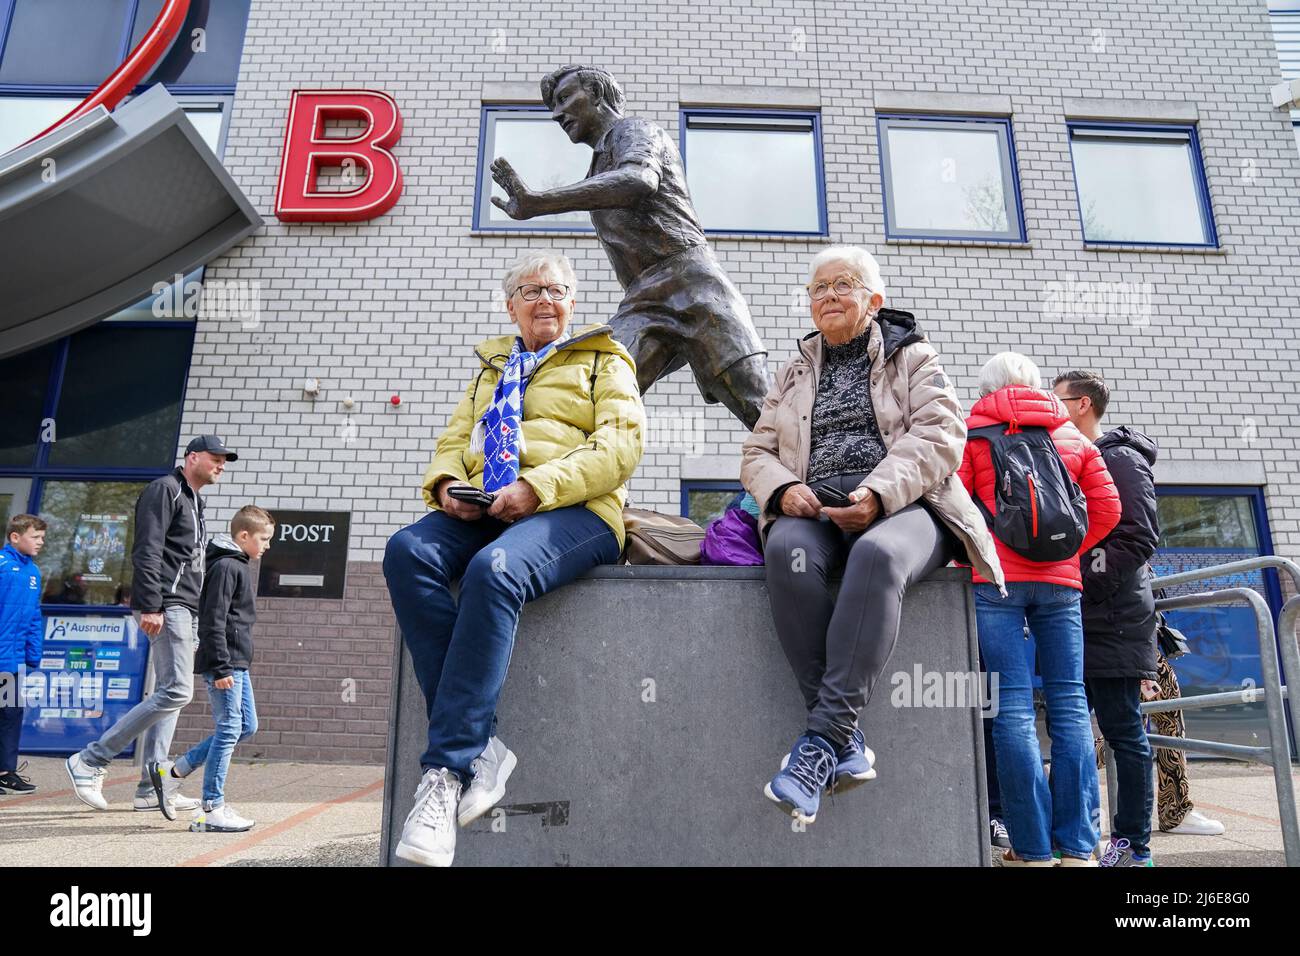 HEERENVEEN, NETHERLANDS - MAY 1: Two supporters sit besides the statue of Abe Lenstra in front of the stadium prior to the Dutch Eredivisie match between sc Heerenveen and SC Cambuur at the Abe Lenstra Stadion on May 1, 2022 in Heerenveen, Netherlands (Photo by Rene Nijhuis/Orange Pictures) Stock Photo